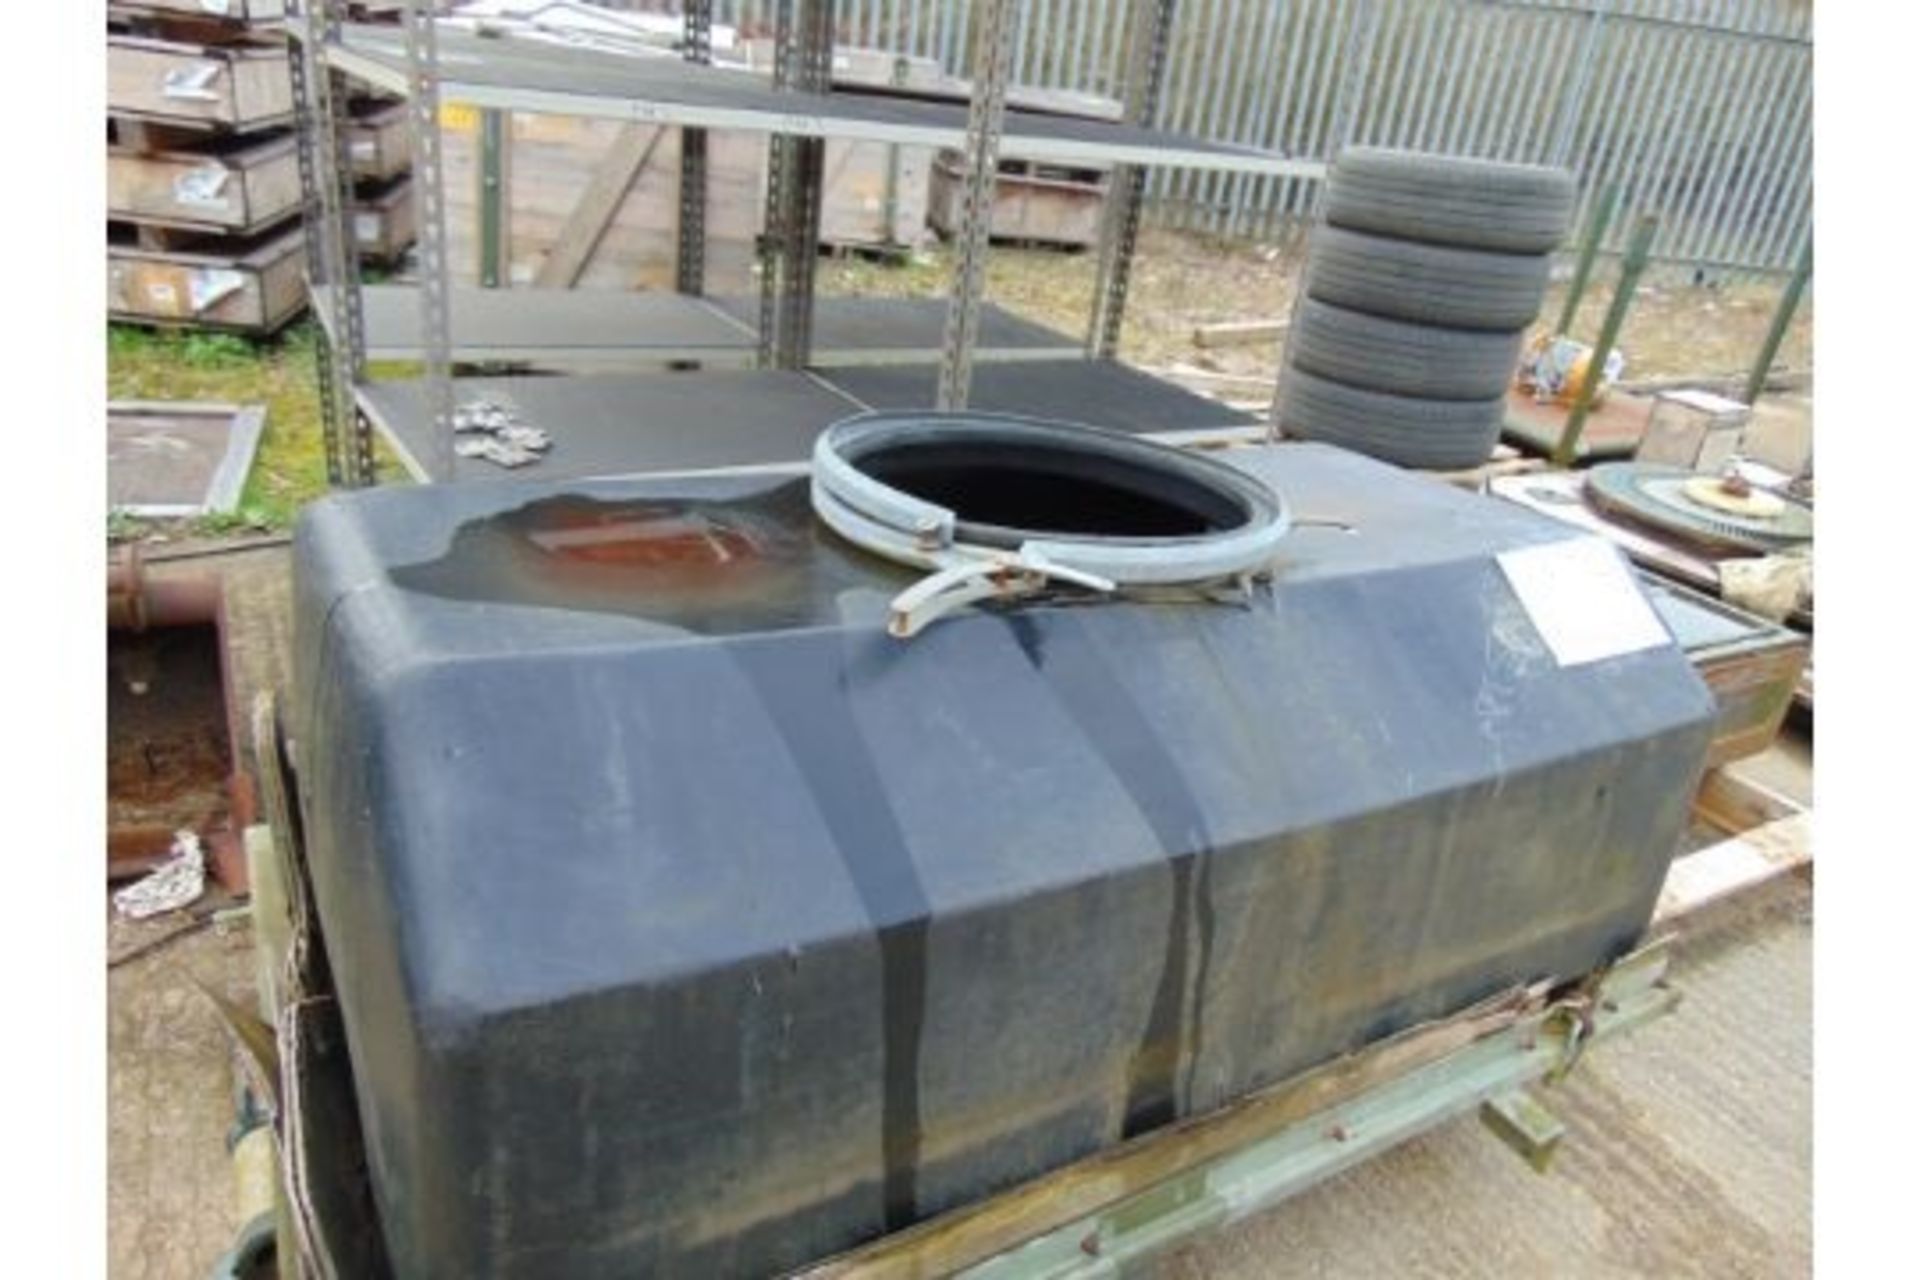 100 Gall British Army Demountable Water Container Fits Land Rover 3/4 ton Trailer - Image 2 of 2